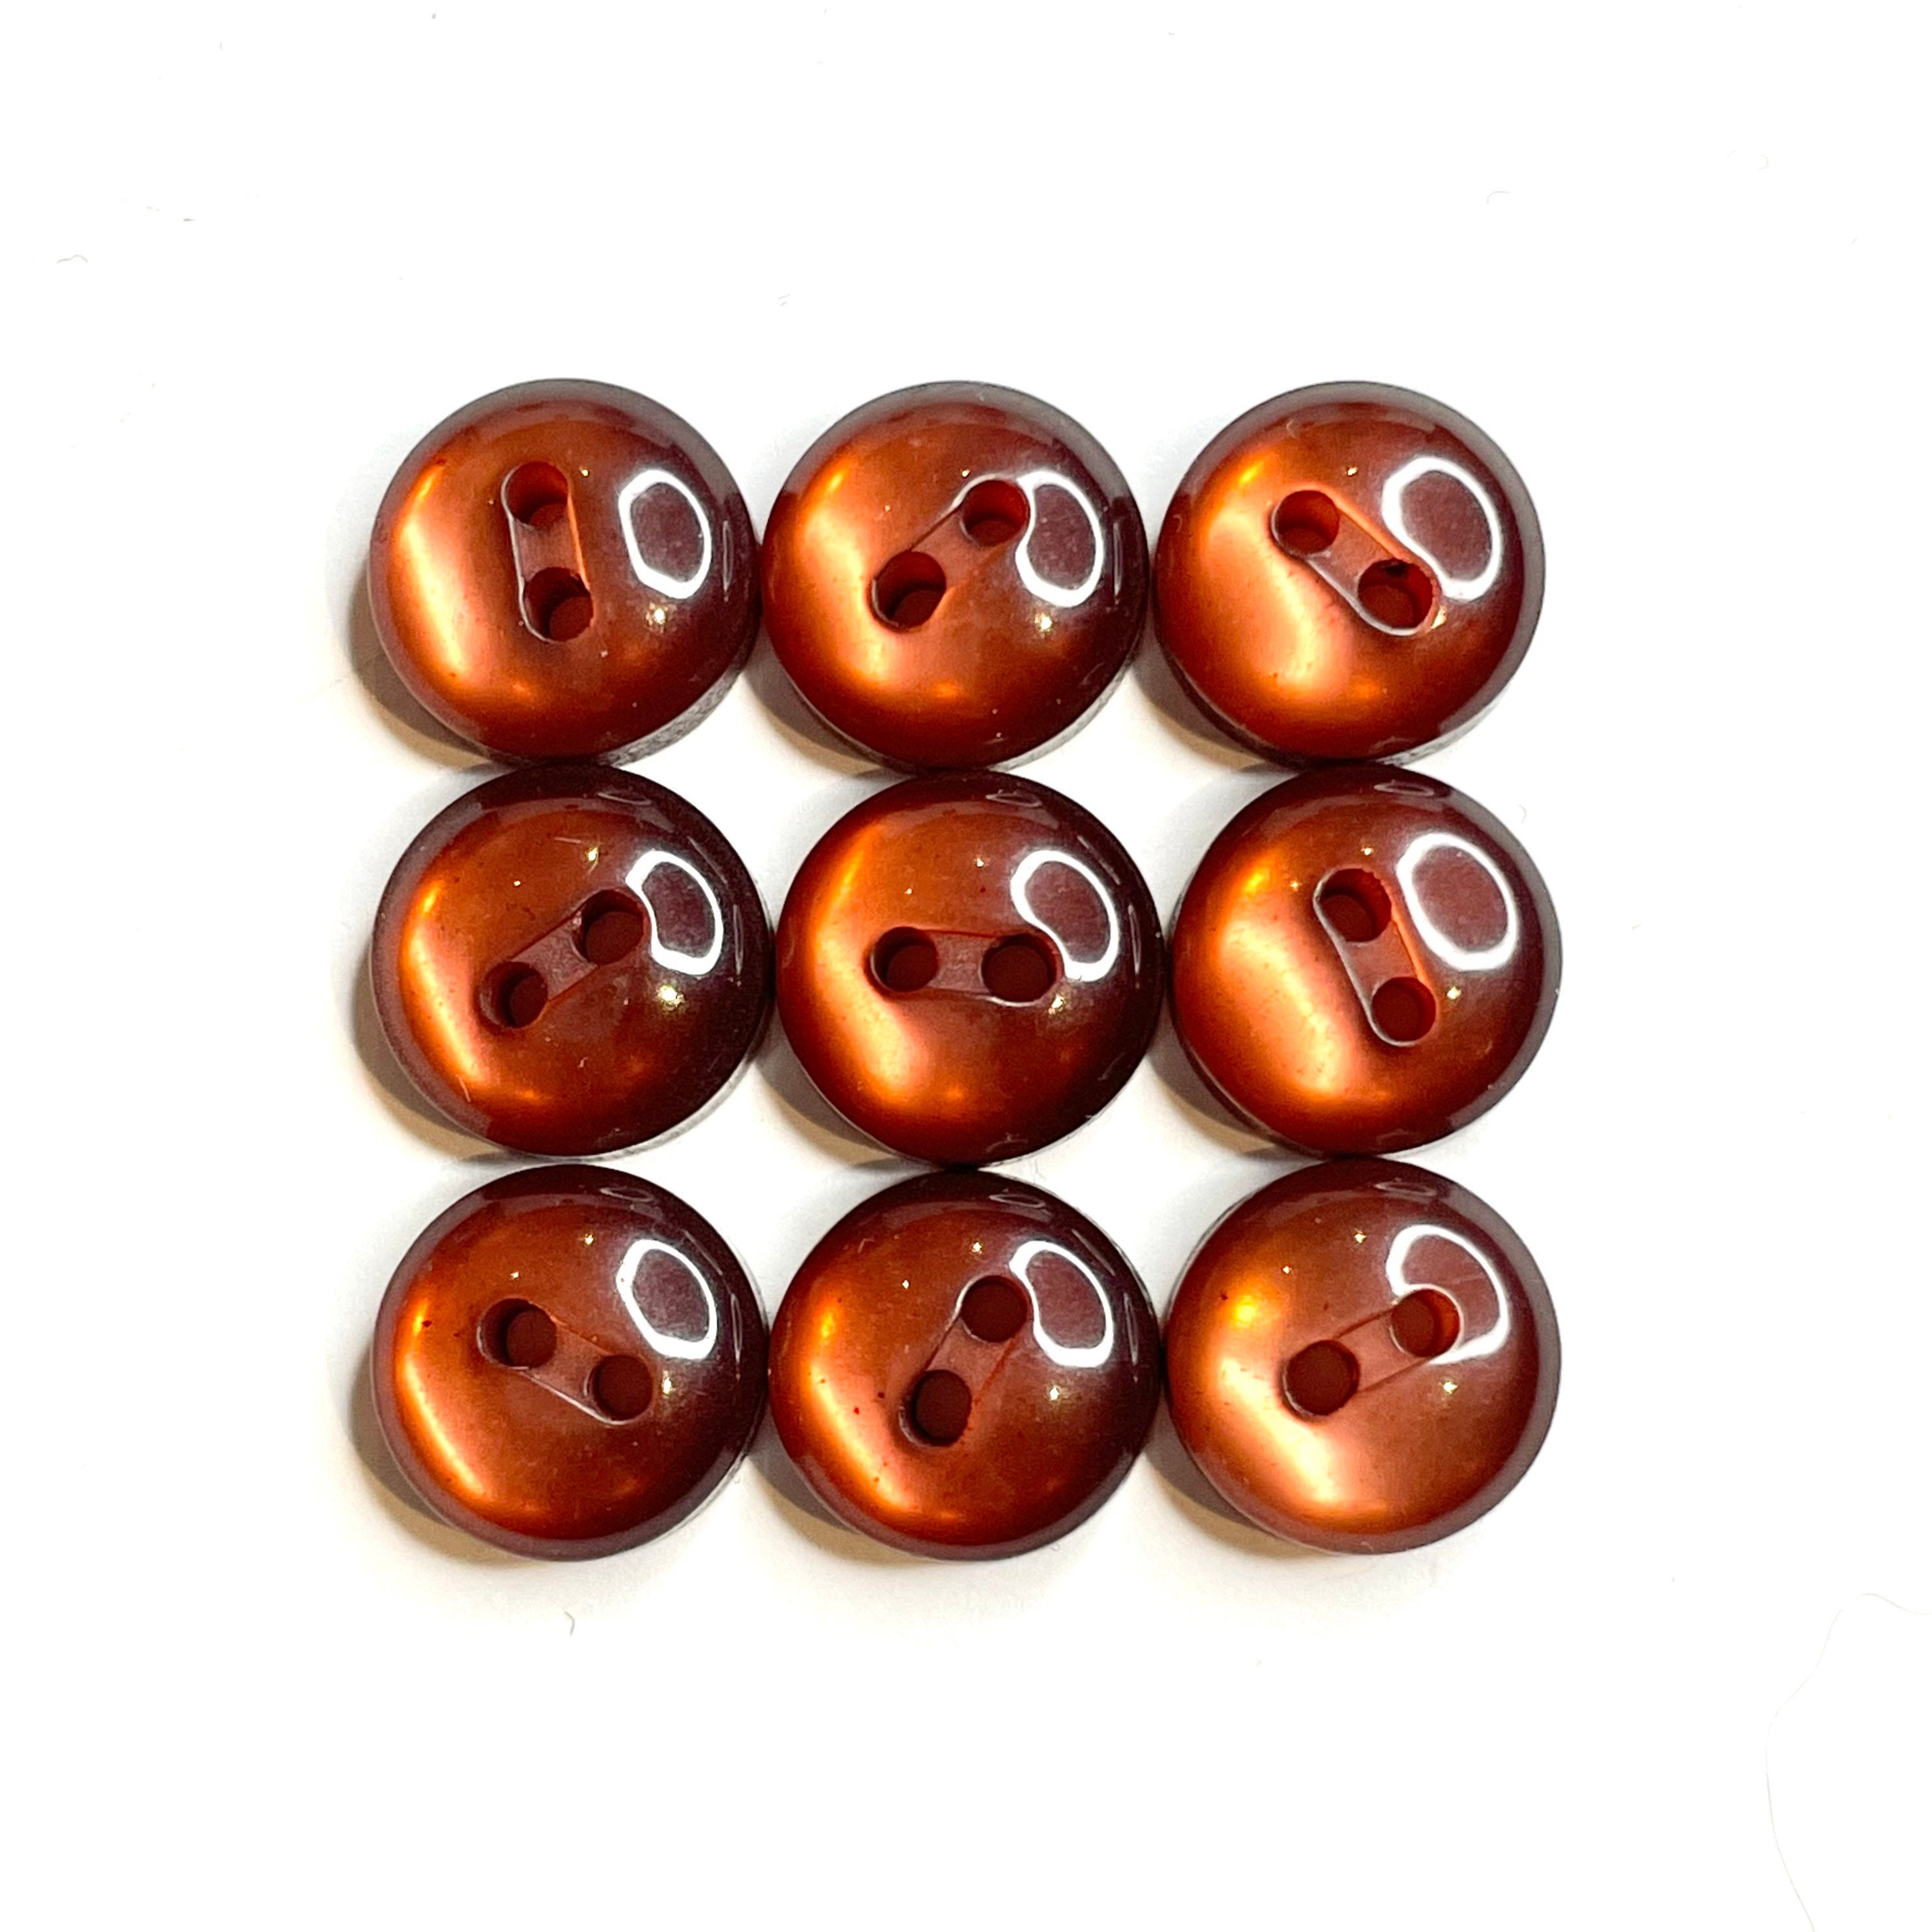 11MM 9 Bronze Buttons for Knitting and Sewing Dresses 2Hole Half Ball Buttons Buttons for Tops Shirts Blouses